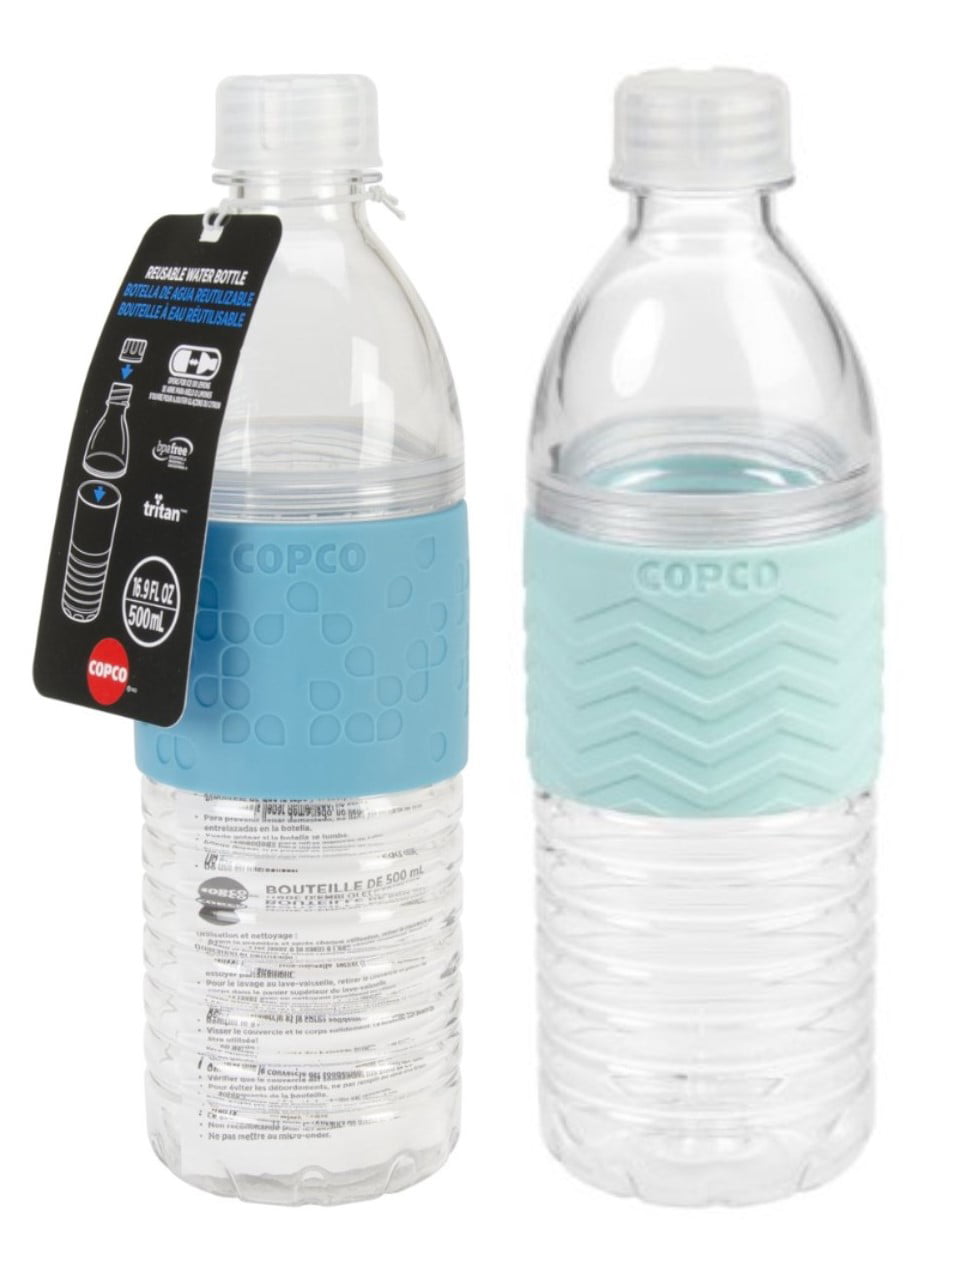 16.9oz KOM Cycling Water Bottle Collection 500ml 2 Bottles, Ride. More. Cycling Water Bottle Inspiration